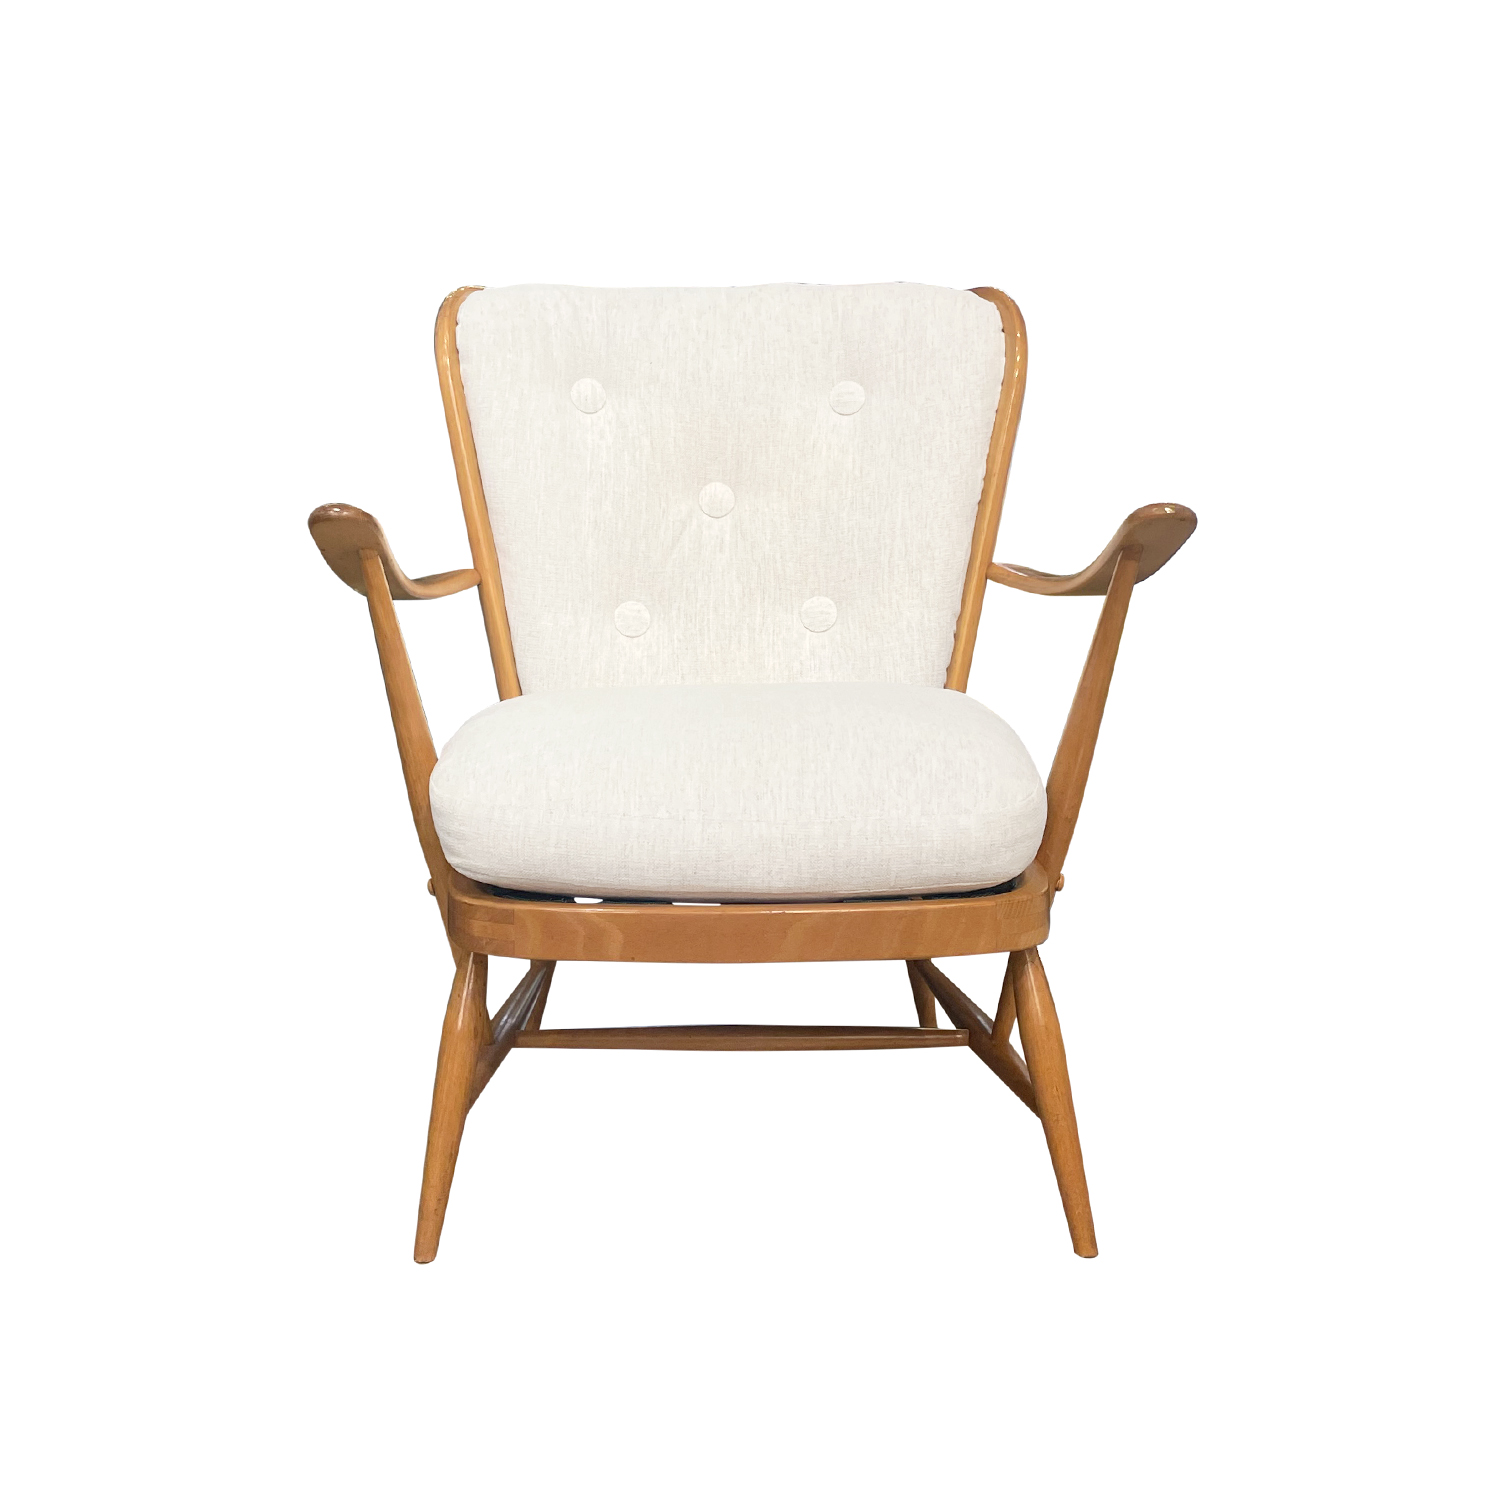 20th Century English Modern Beech Armchair – Single Vintage Side Chair by Ercol